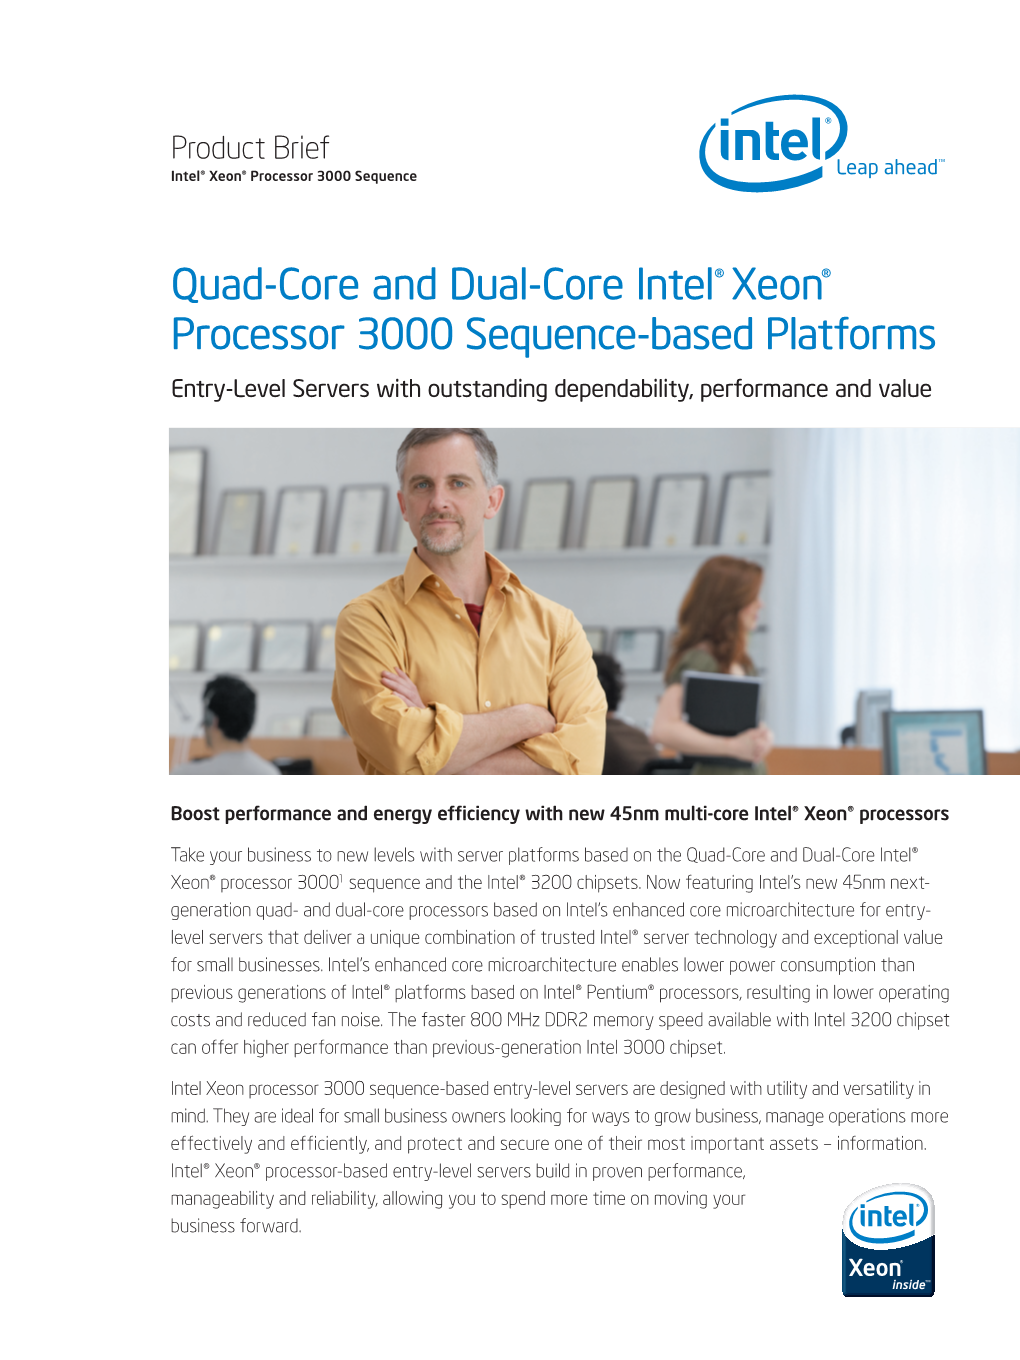 Quad-Core and Dual-Core Intel® Xeon® Processor 3000 Sequence-Based Platforms Entry-Level Servers with Outstanding Dependability, Performance and Value